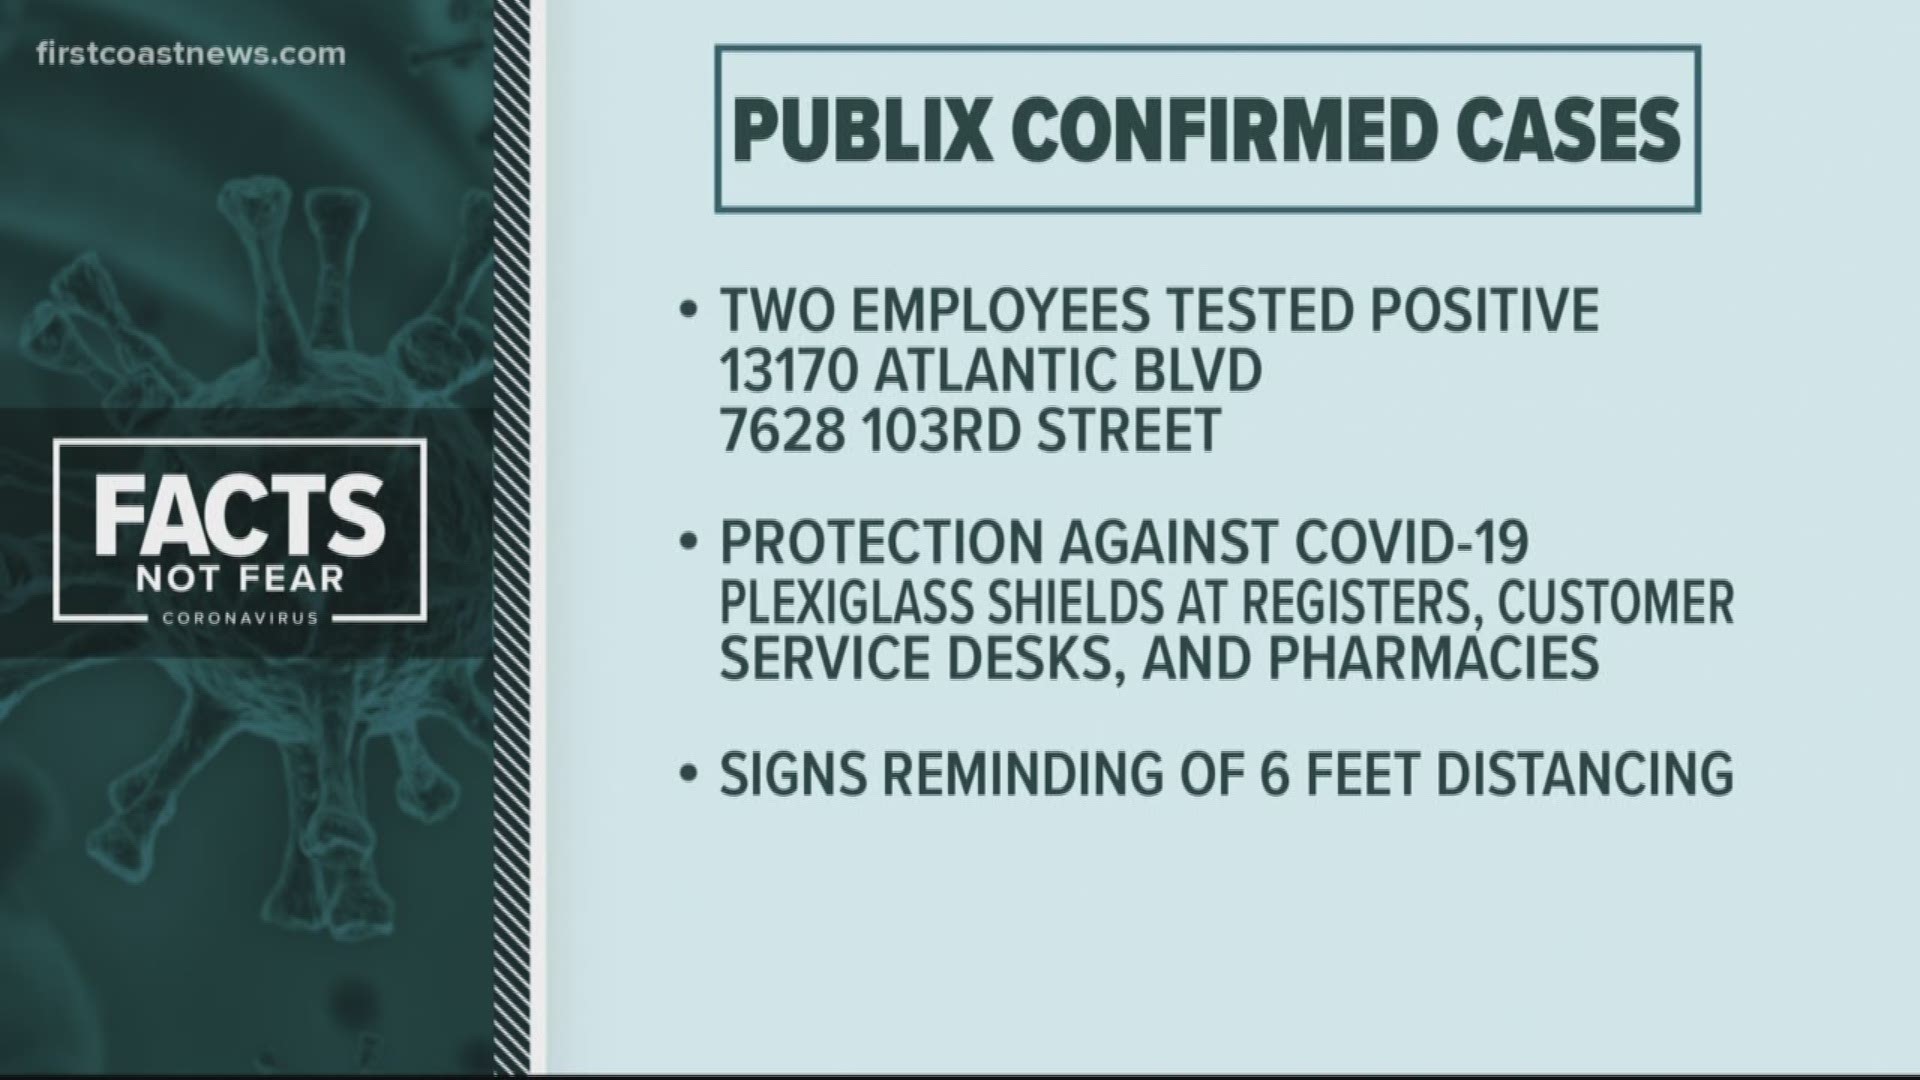 Publix said the employees worked at a store at 13170 Atlantic Blvd. Ste. 29,  and 7628 103rd St. Ste, 24.